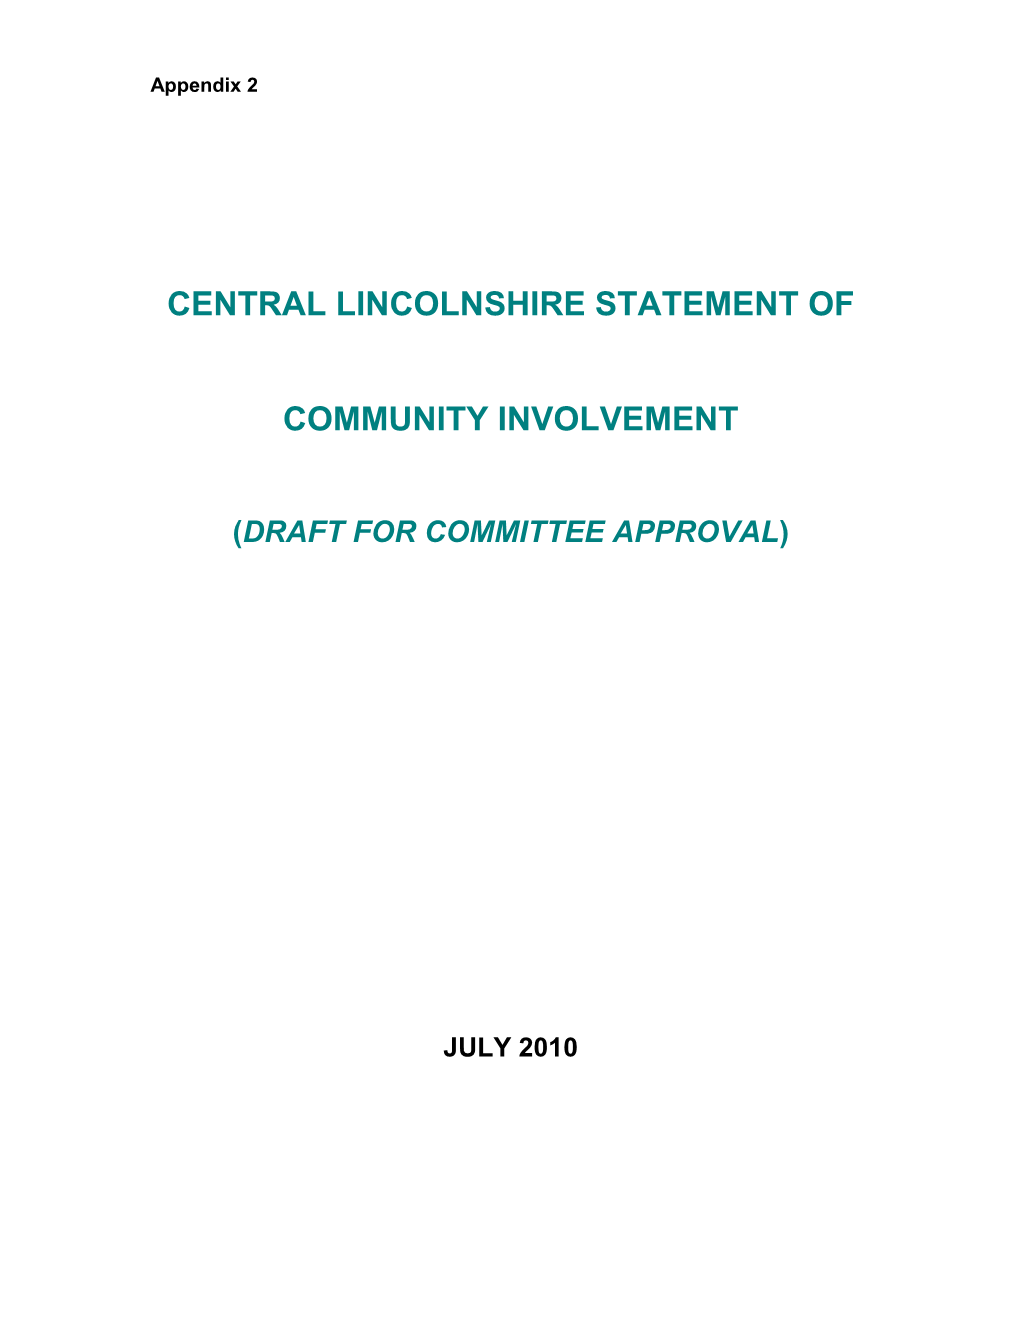 Central Lincolnshire Statement of Community Involvement